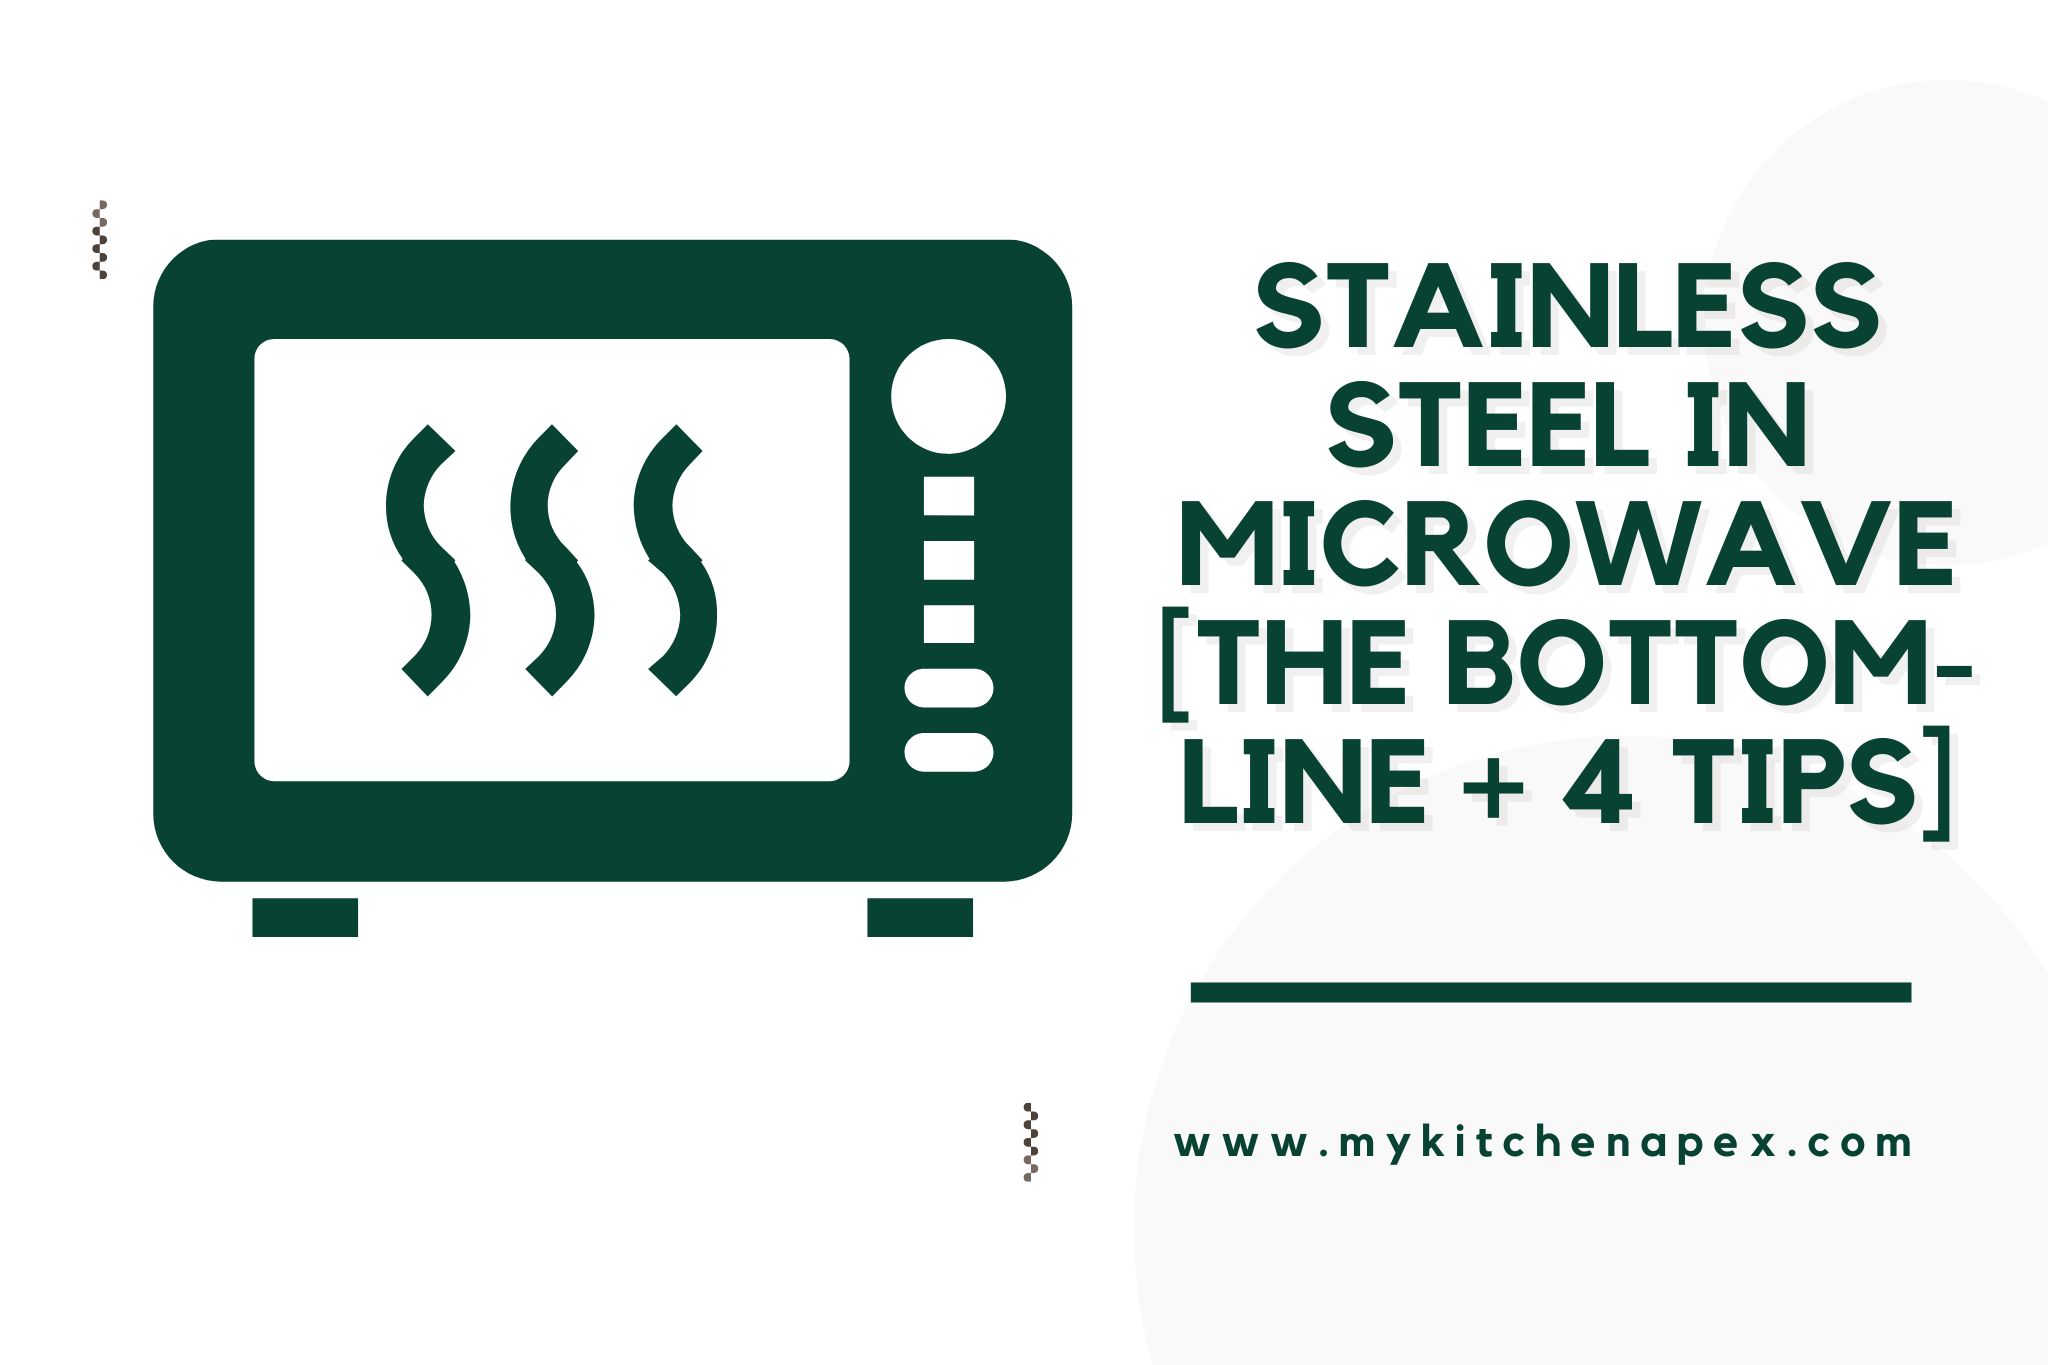 Stainless Steel In Microwave [The BOTTOM-LINE + 4 Tips]